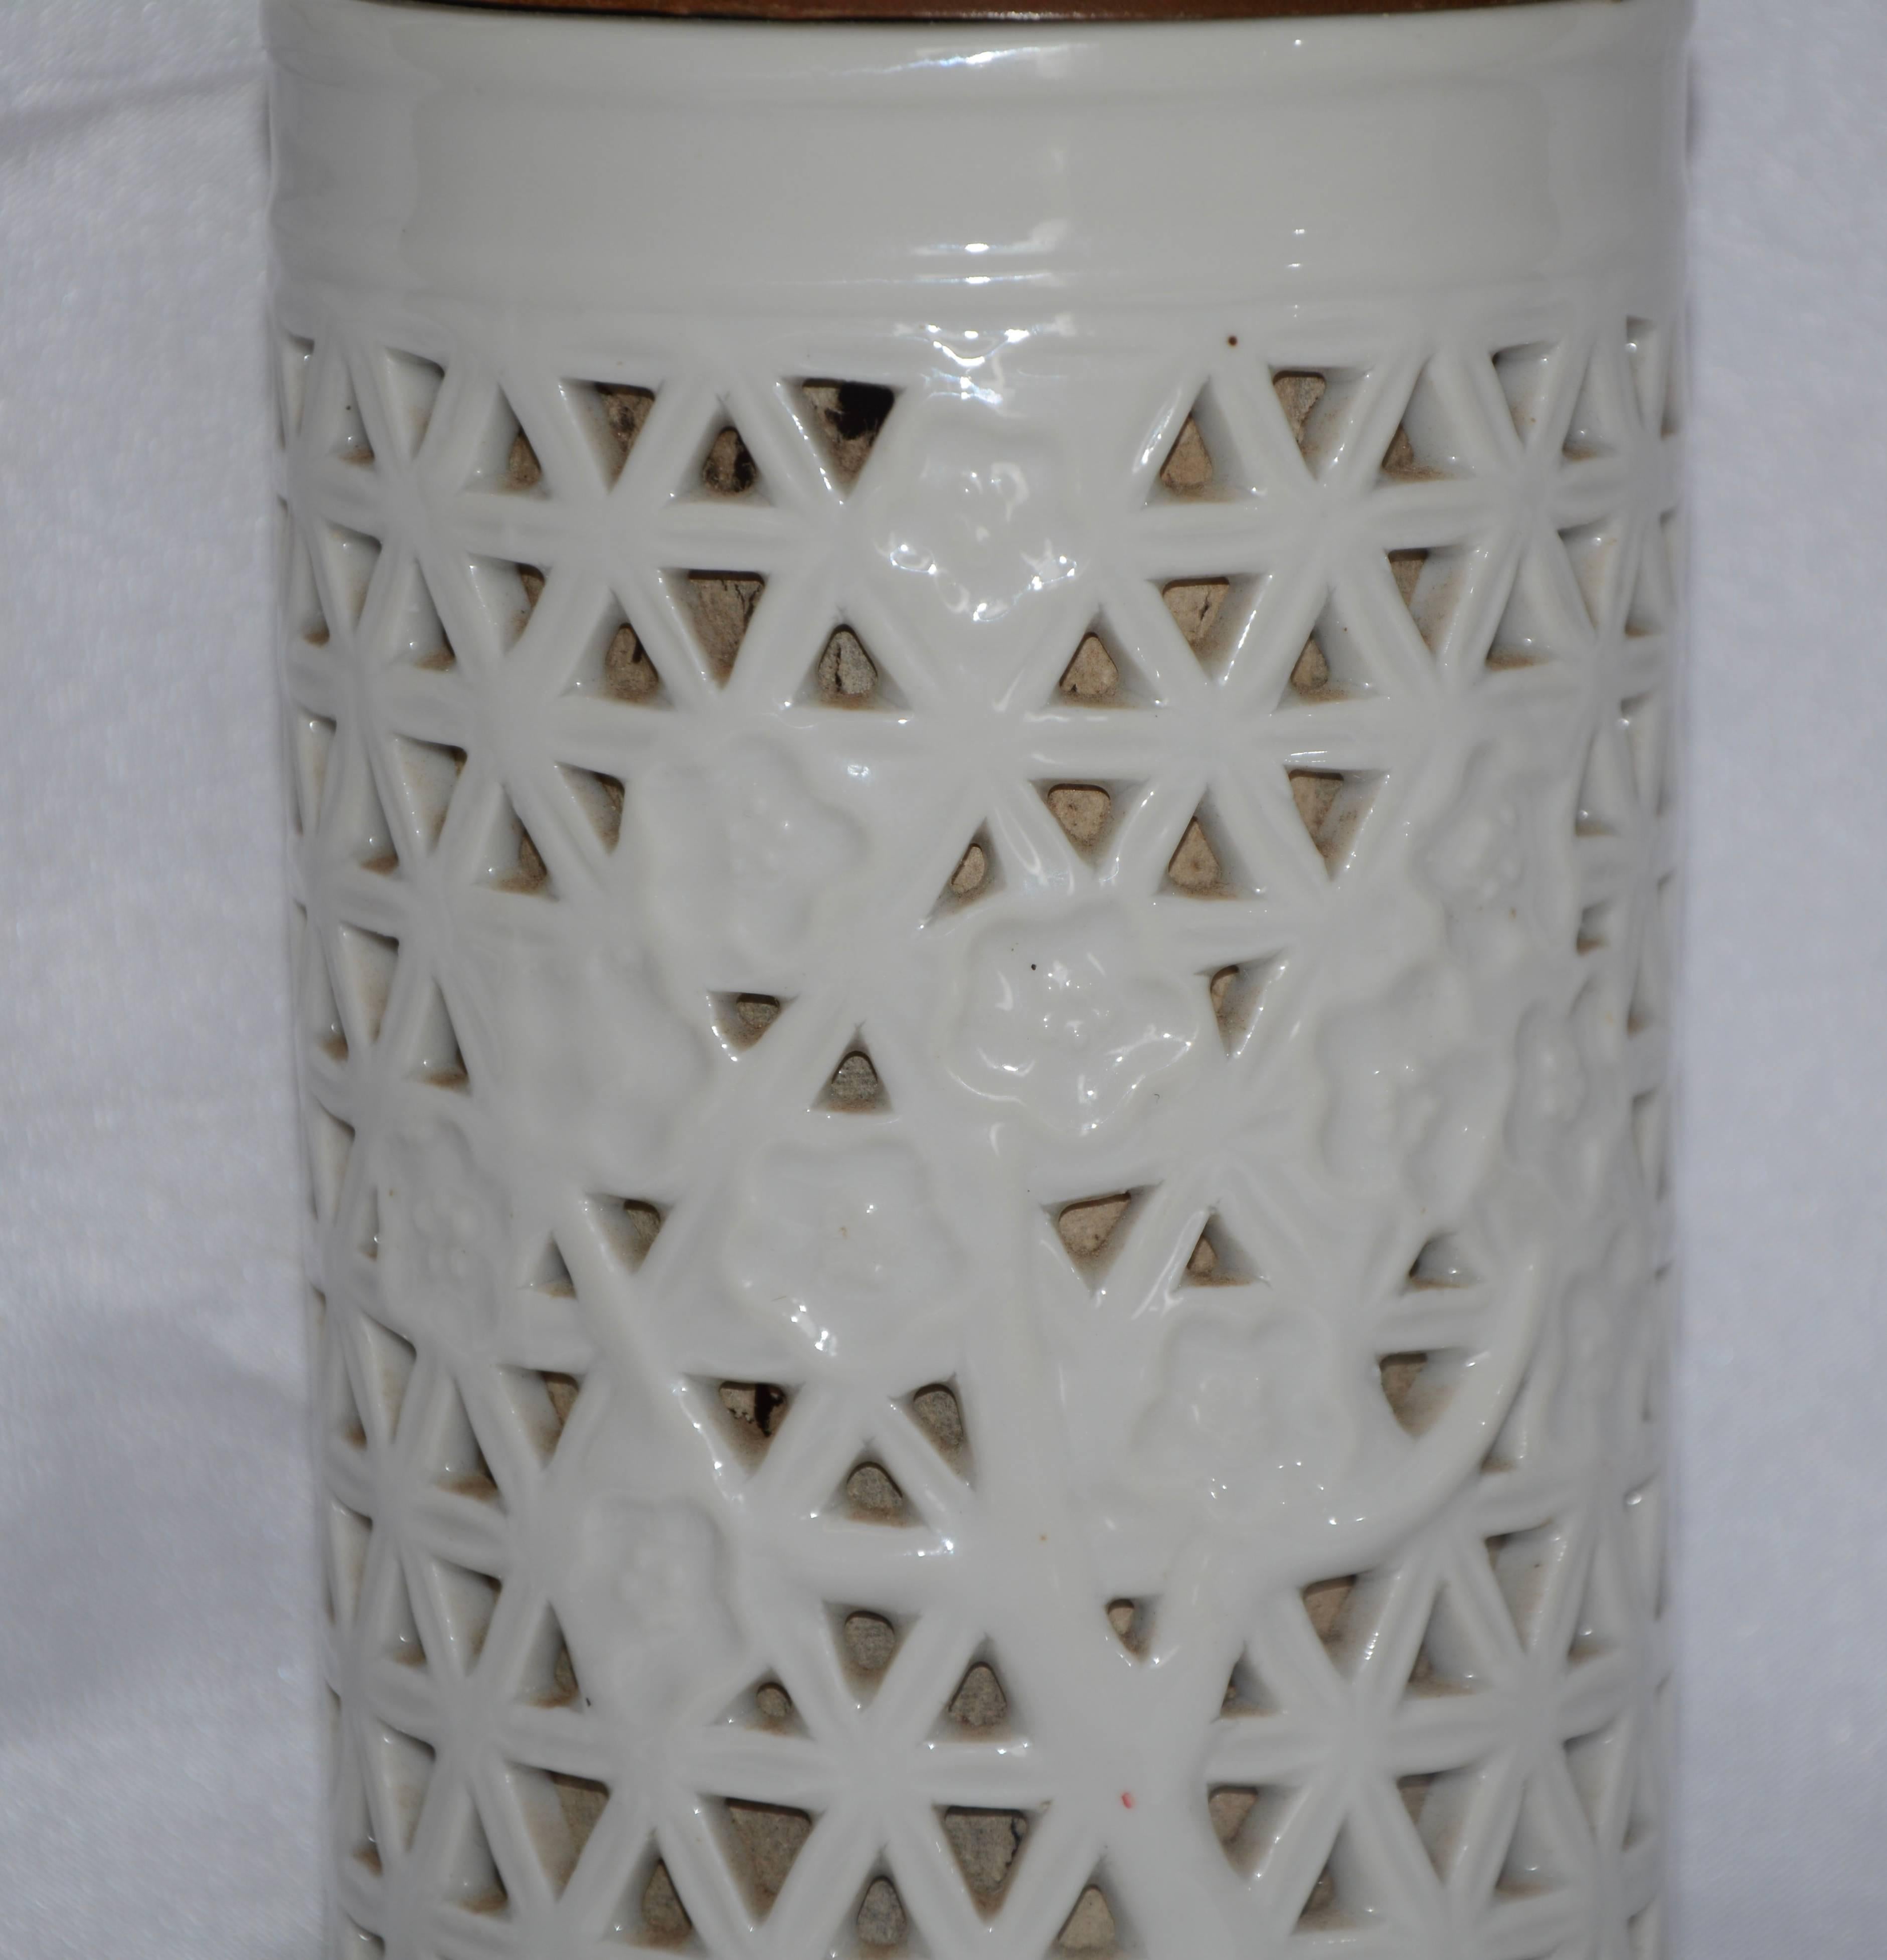 Cherry blossoms accent this Blanc-de-chine off-white ceramic lamp. The pierced porcelain is lined with paper and the top and bottom are made of wood. The push-thru socket turns on the top socket and also a soft light enclosed inside the porcelain.